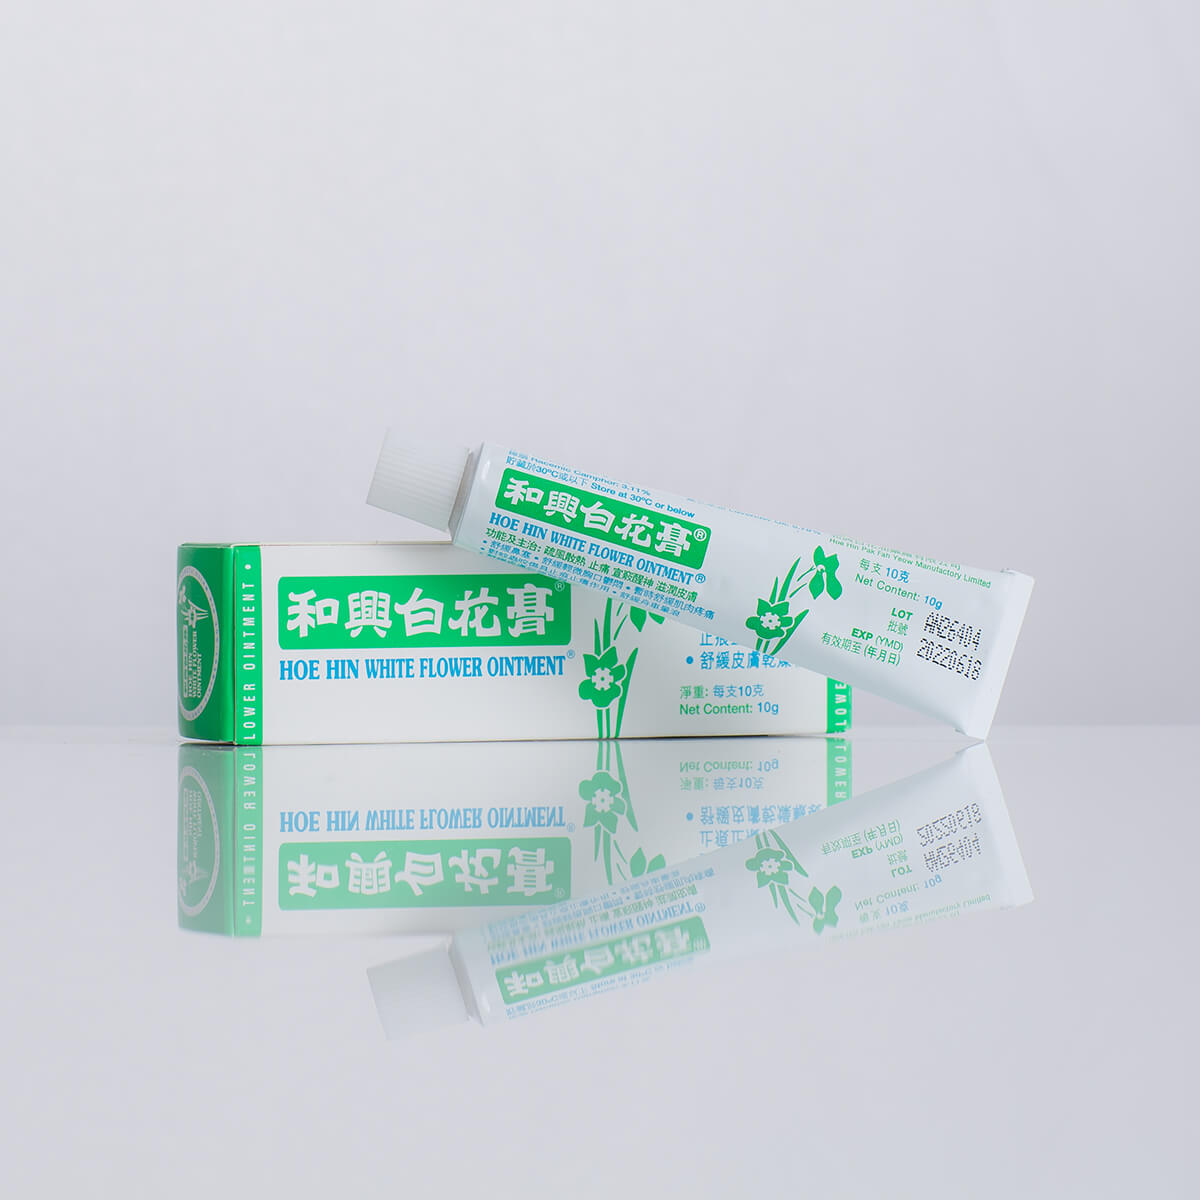 Hoe Hin White Flower Ointment (10g)